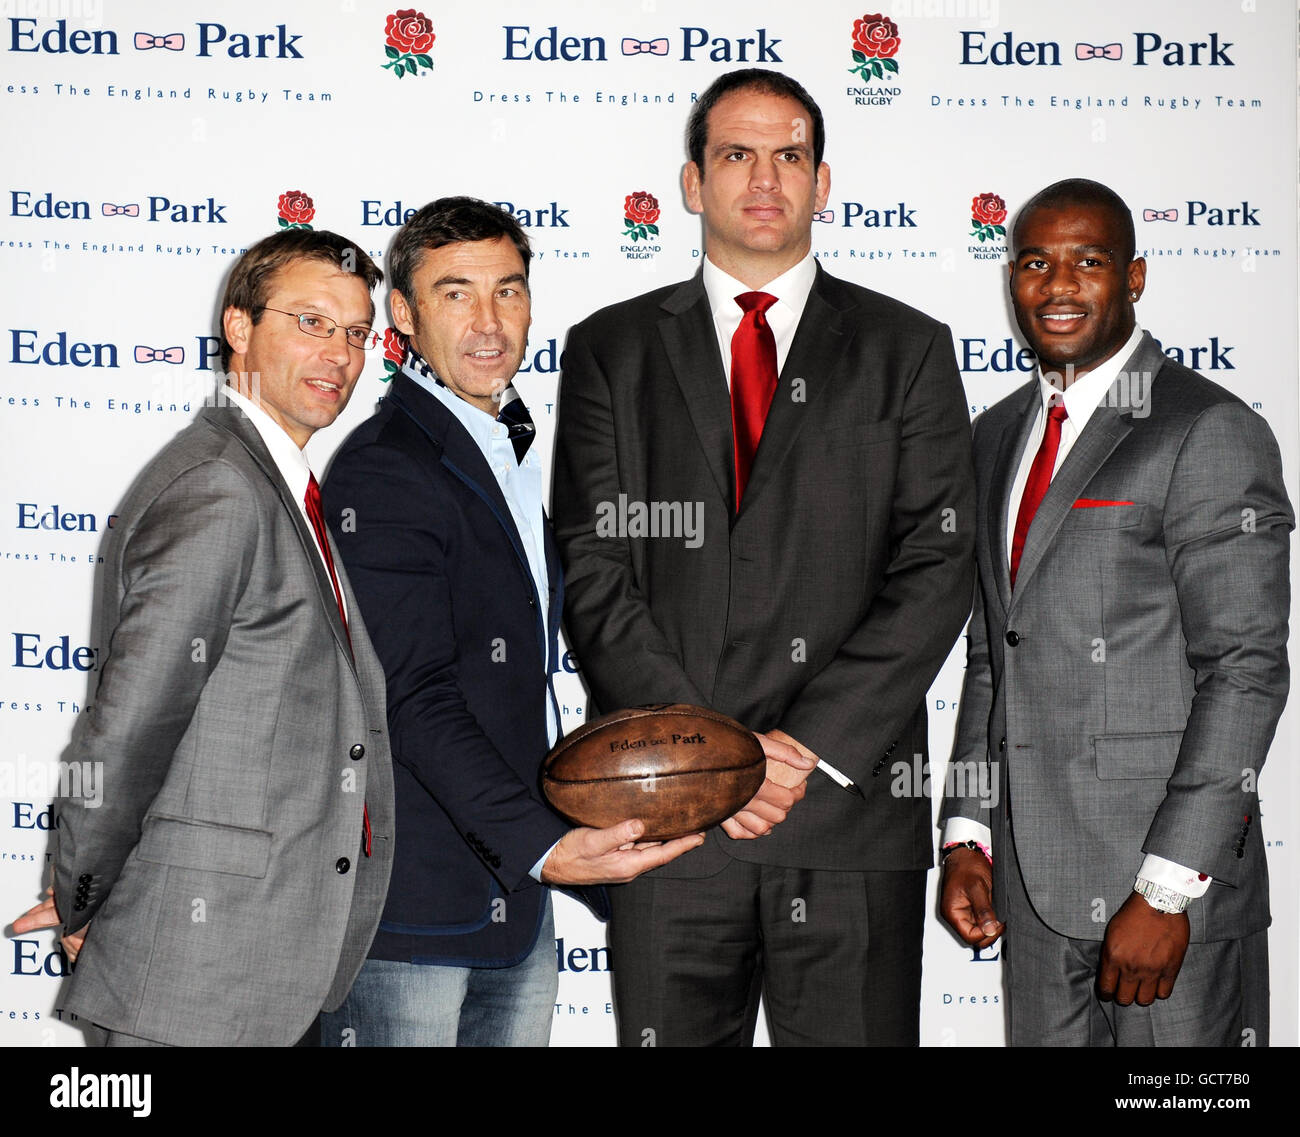 (Left - right) Rob Andrew, Director of Elite Rugby, Franck Mesnel founder of Eden Park, a French fashion brand, Martin Johnson, England Rugby Team Manager and England international, Ugo Monye at Kensington Roof Gardens, London to announce a six year partnership between Rugby Football Union and Eden Park who are to provide the official formalwear for the squad. Stock Photo